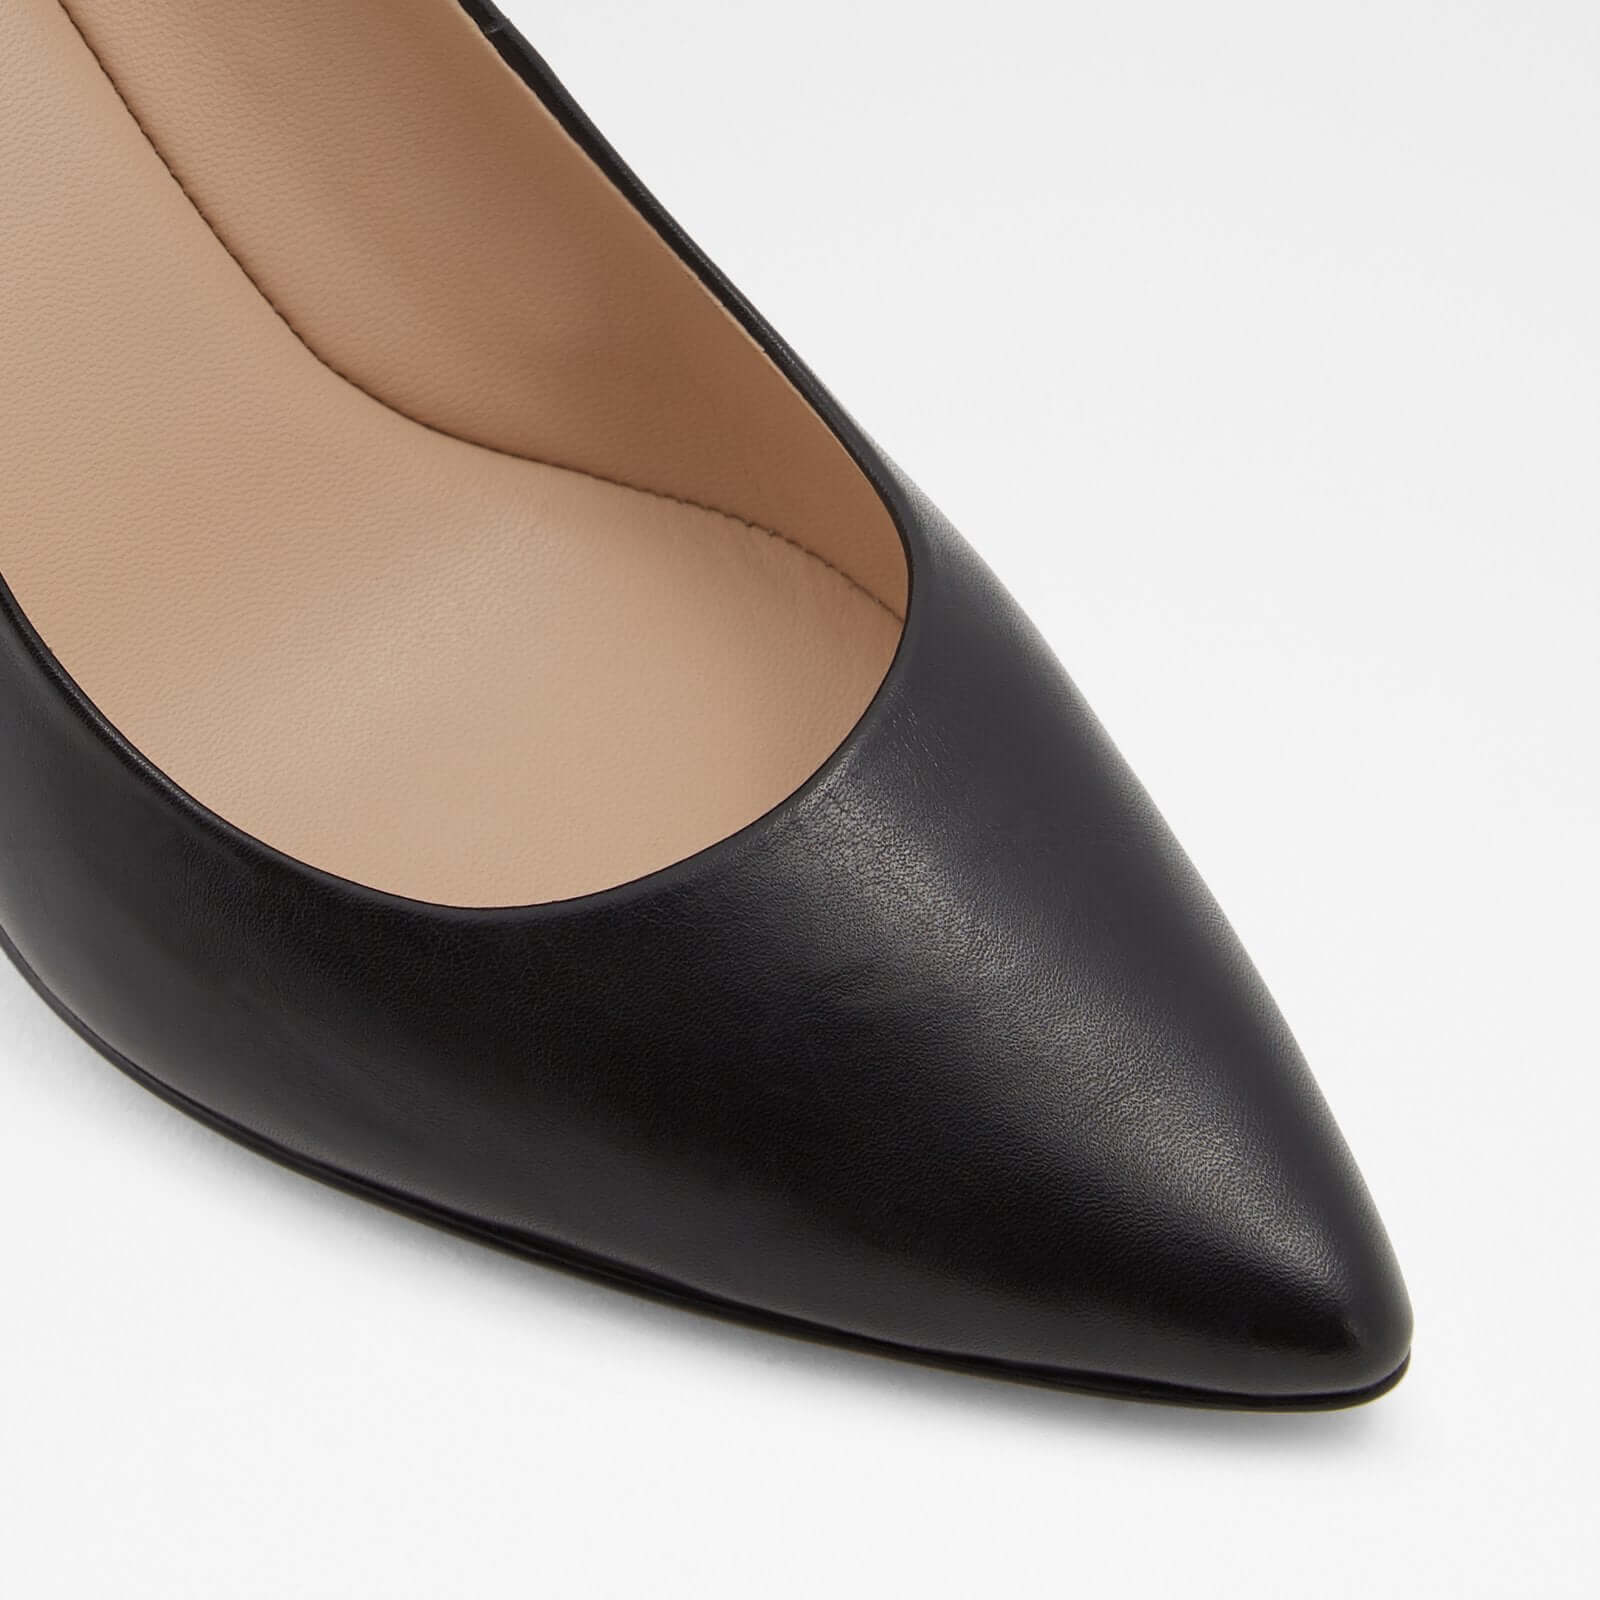 ALDO LEATHER POINTED TOE PUMP IN BLACK